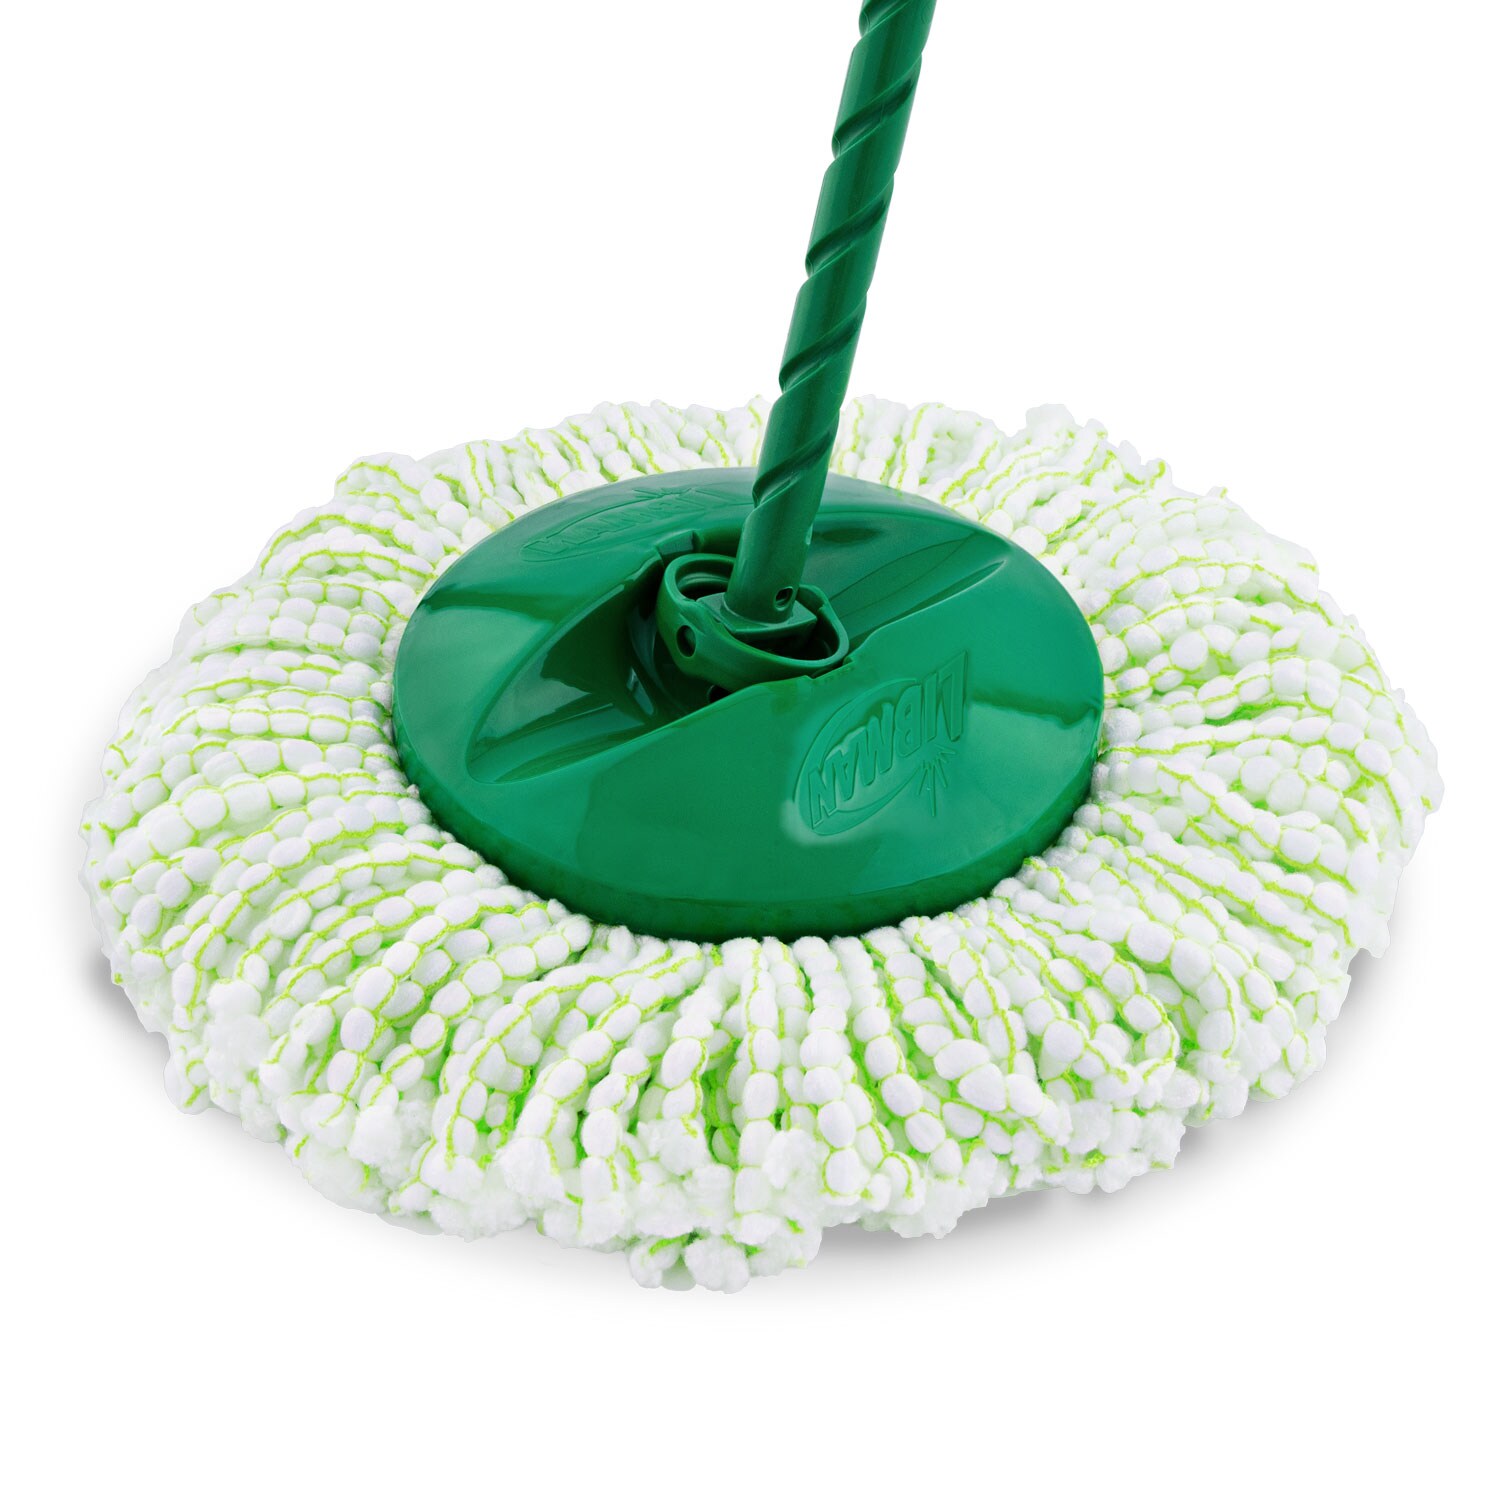 Libman Mop and Bucket Spin, Green/White